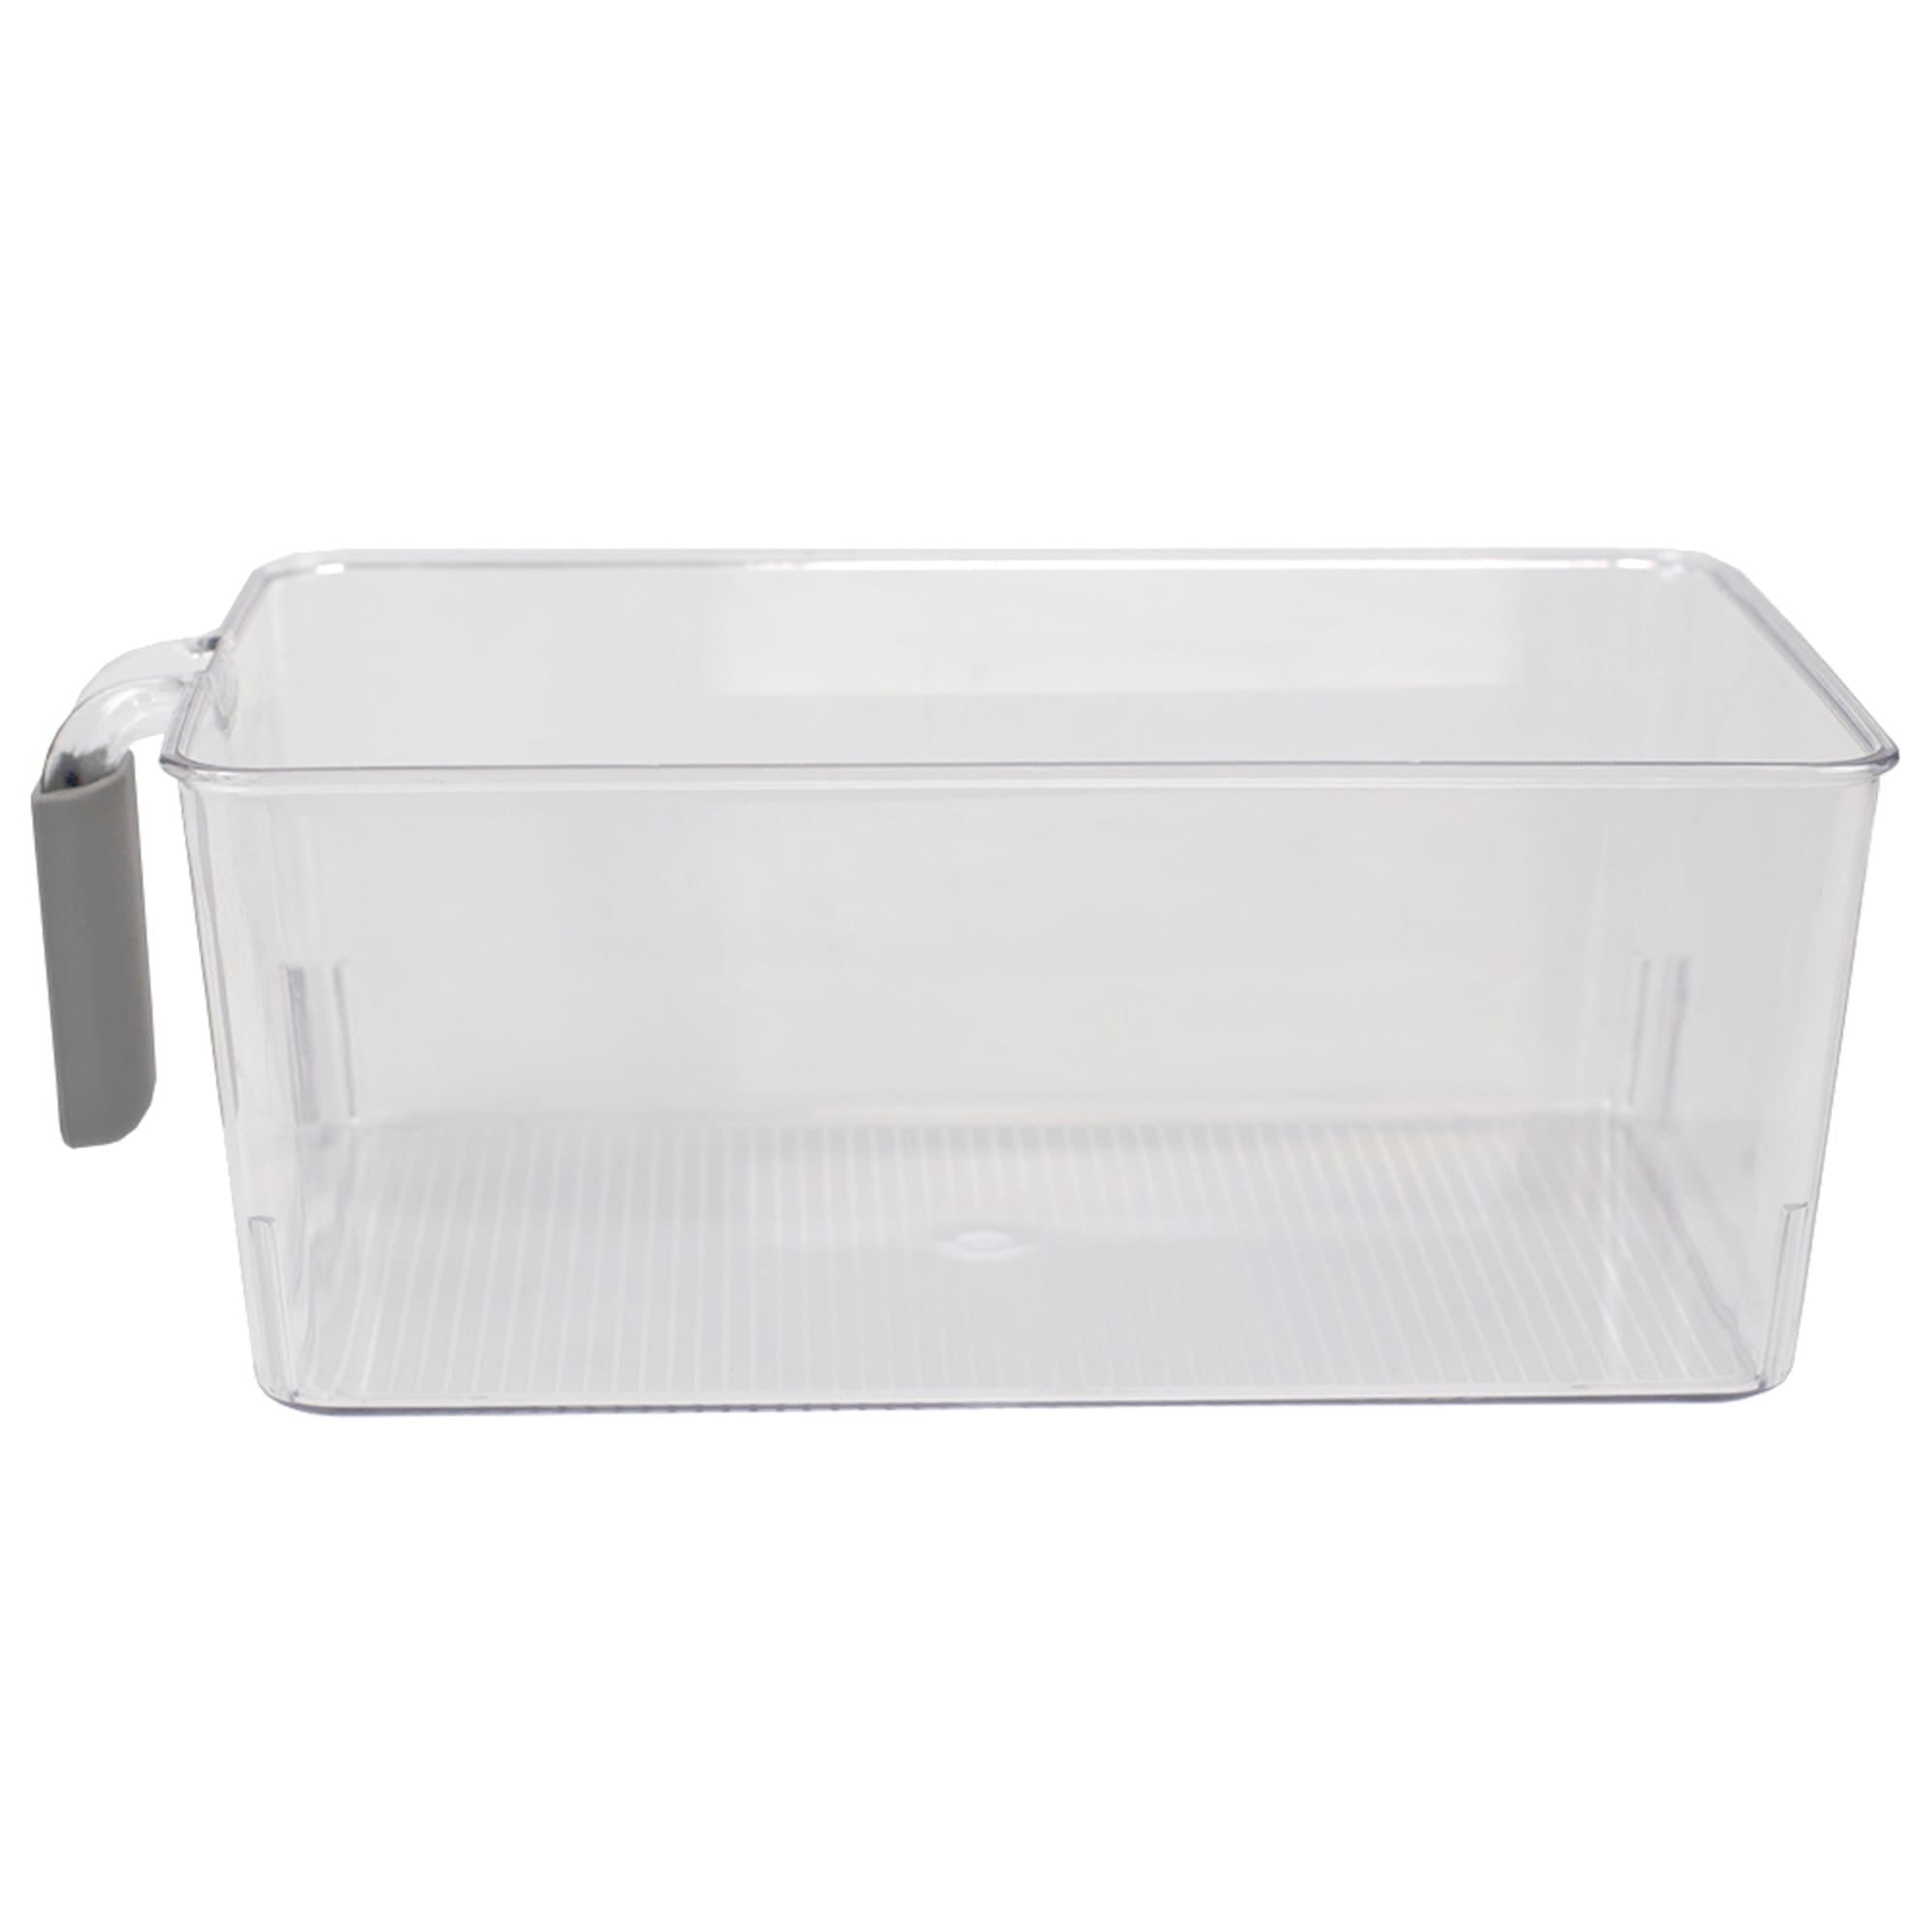 Home Basics Large Pull-Out Plastic Storage Bin with Soft Grip Handle, Clear $4.00 EACH, CASE PACK OF 12